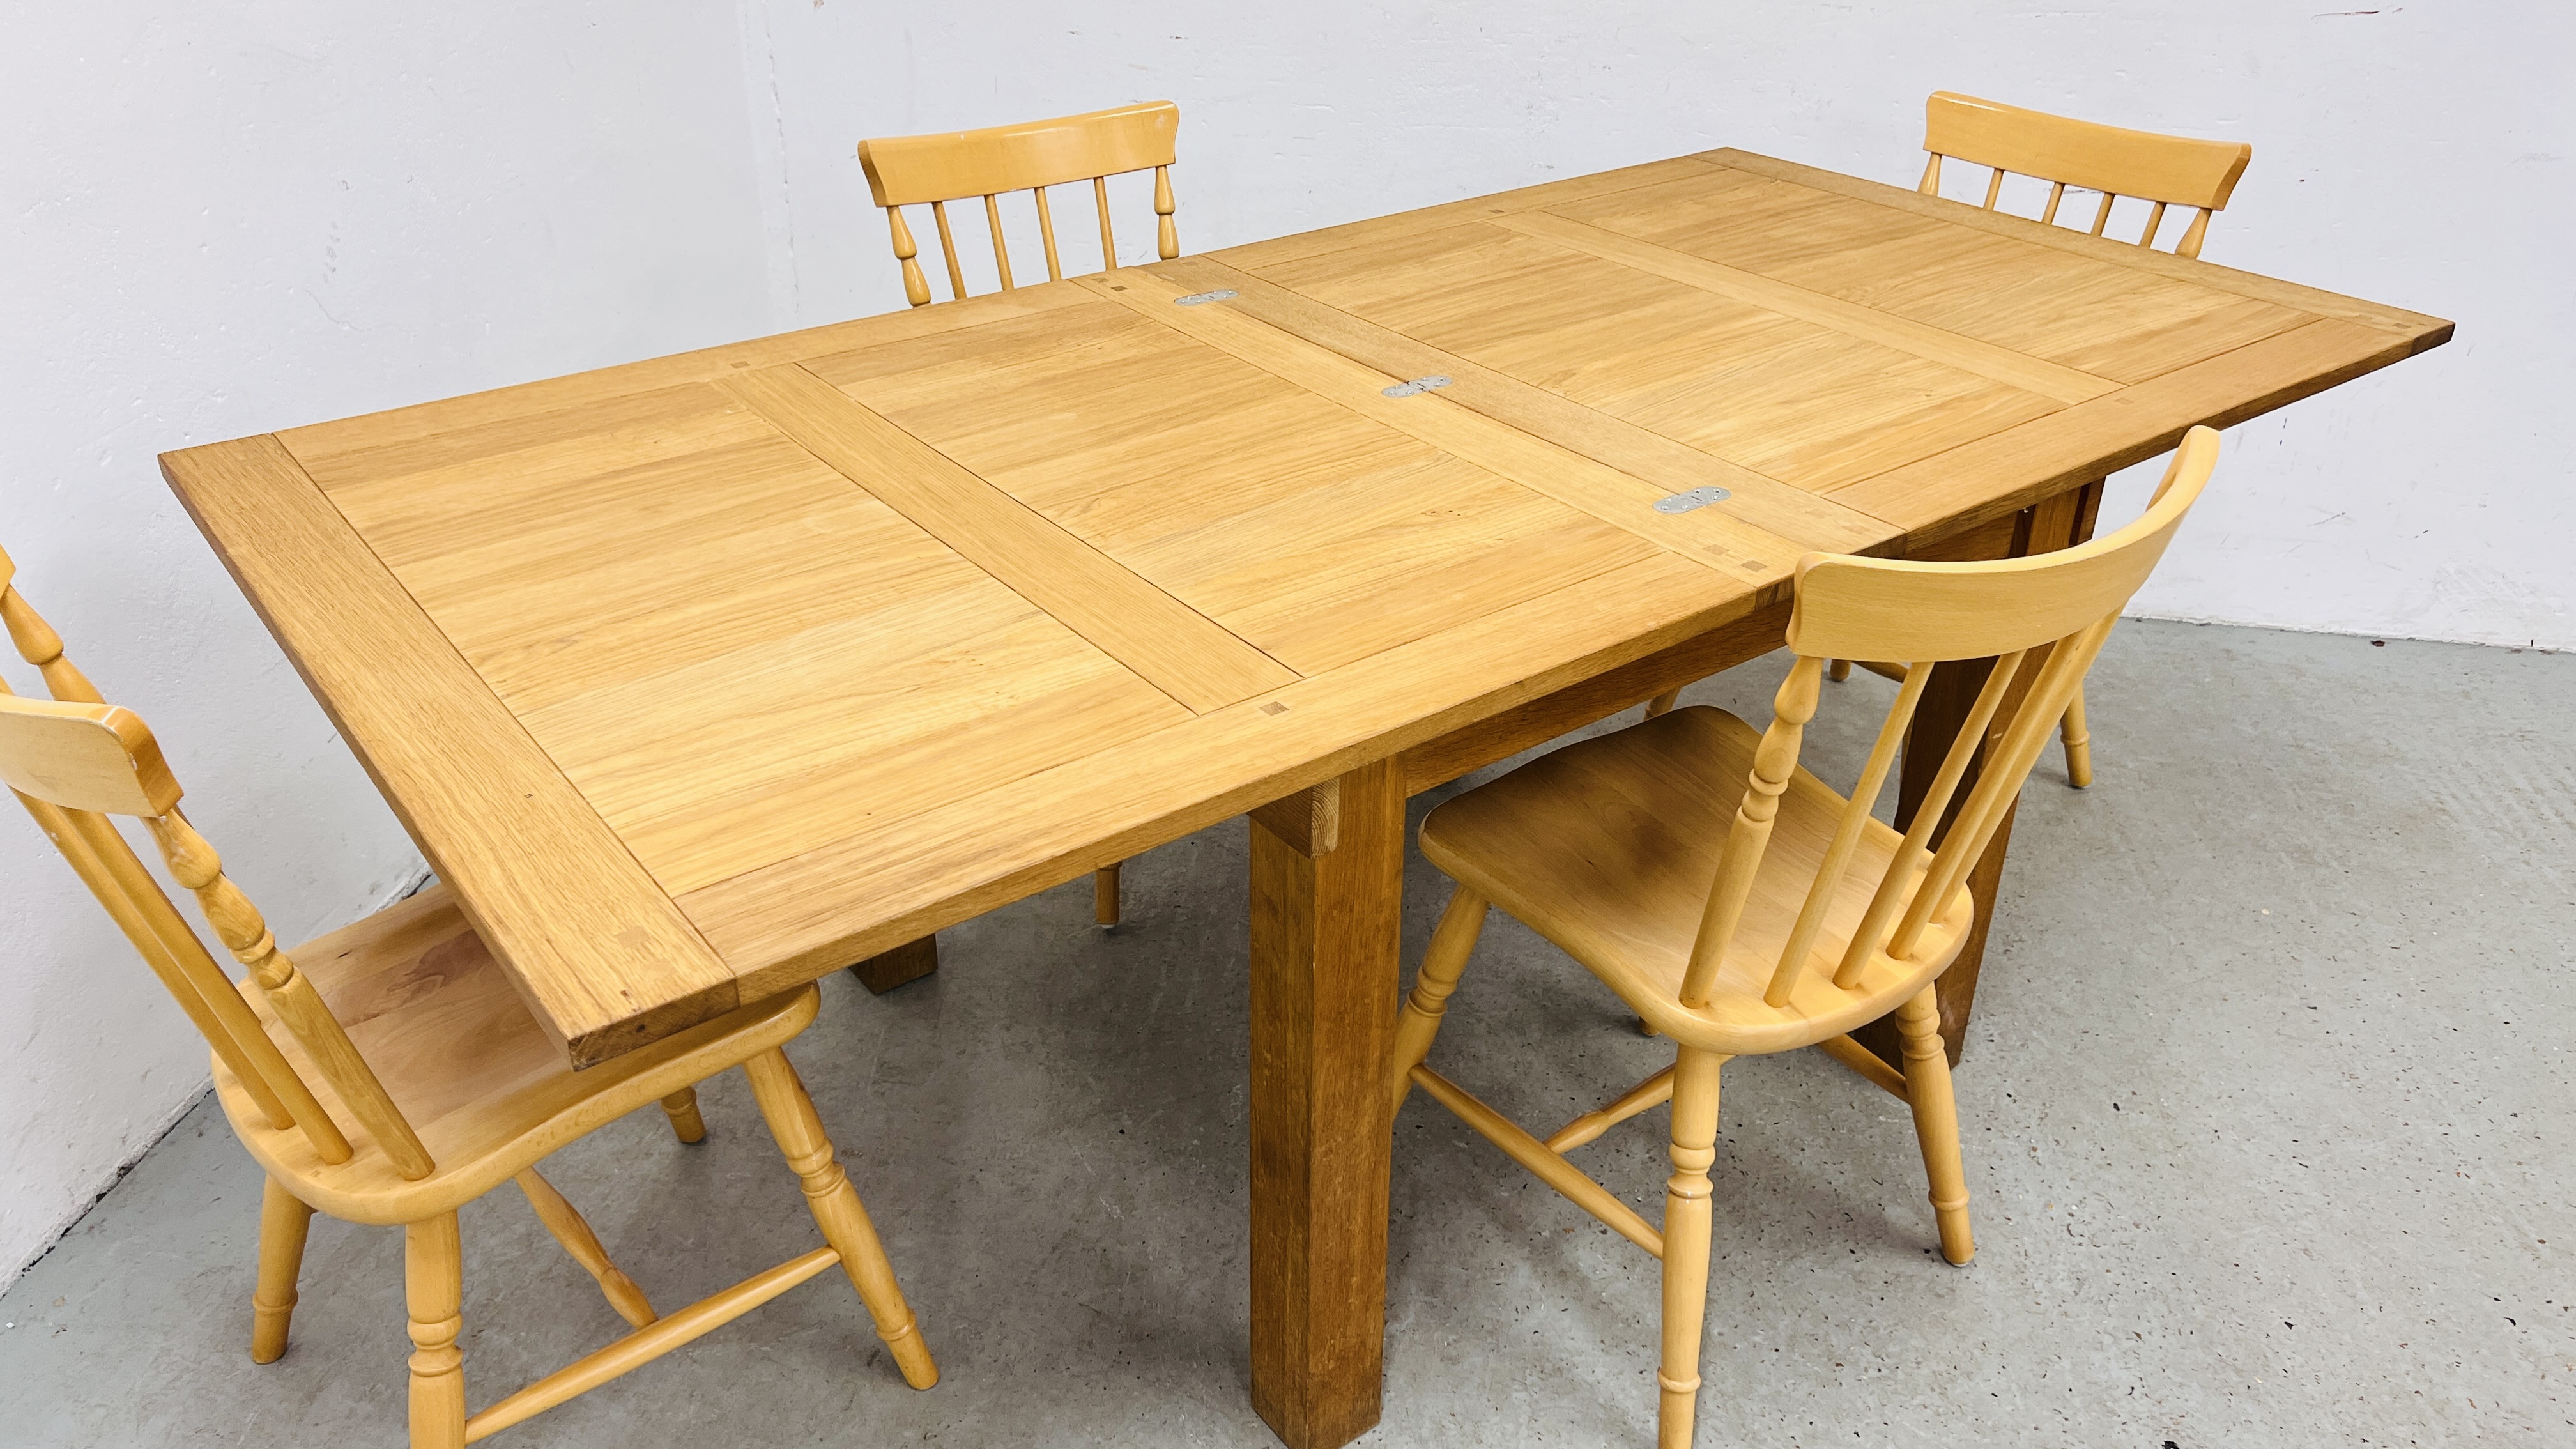 A SOLID OAK EXTENDING DINING TABLE ALONG WITH A SET OF FOUR BEECH WOOD DINING CHAIRS - Image 11 of 14